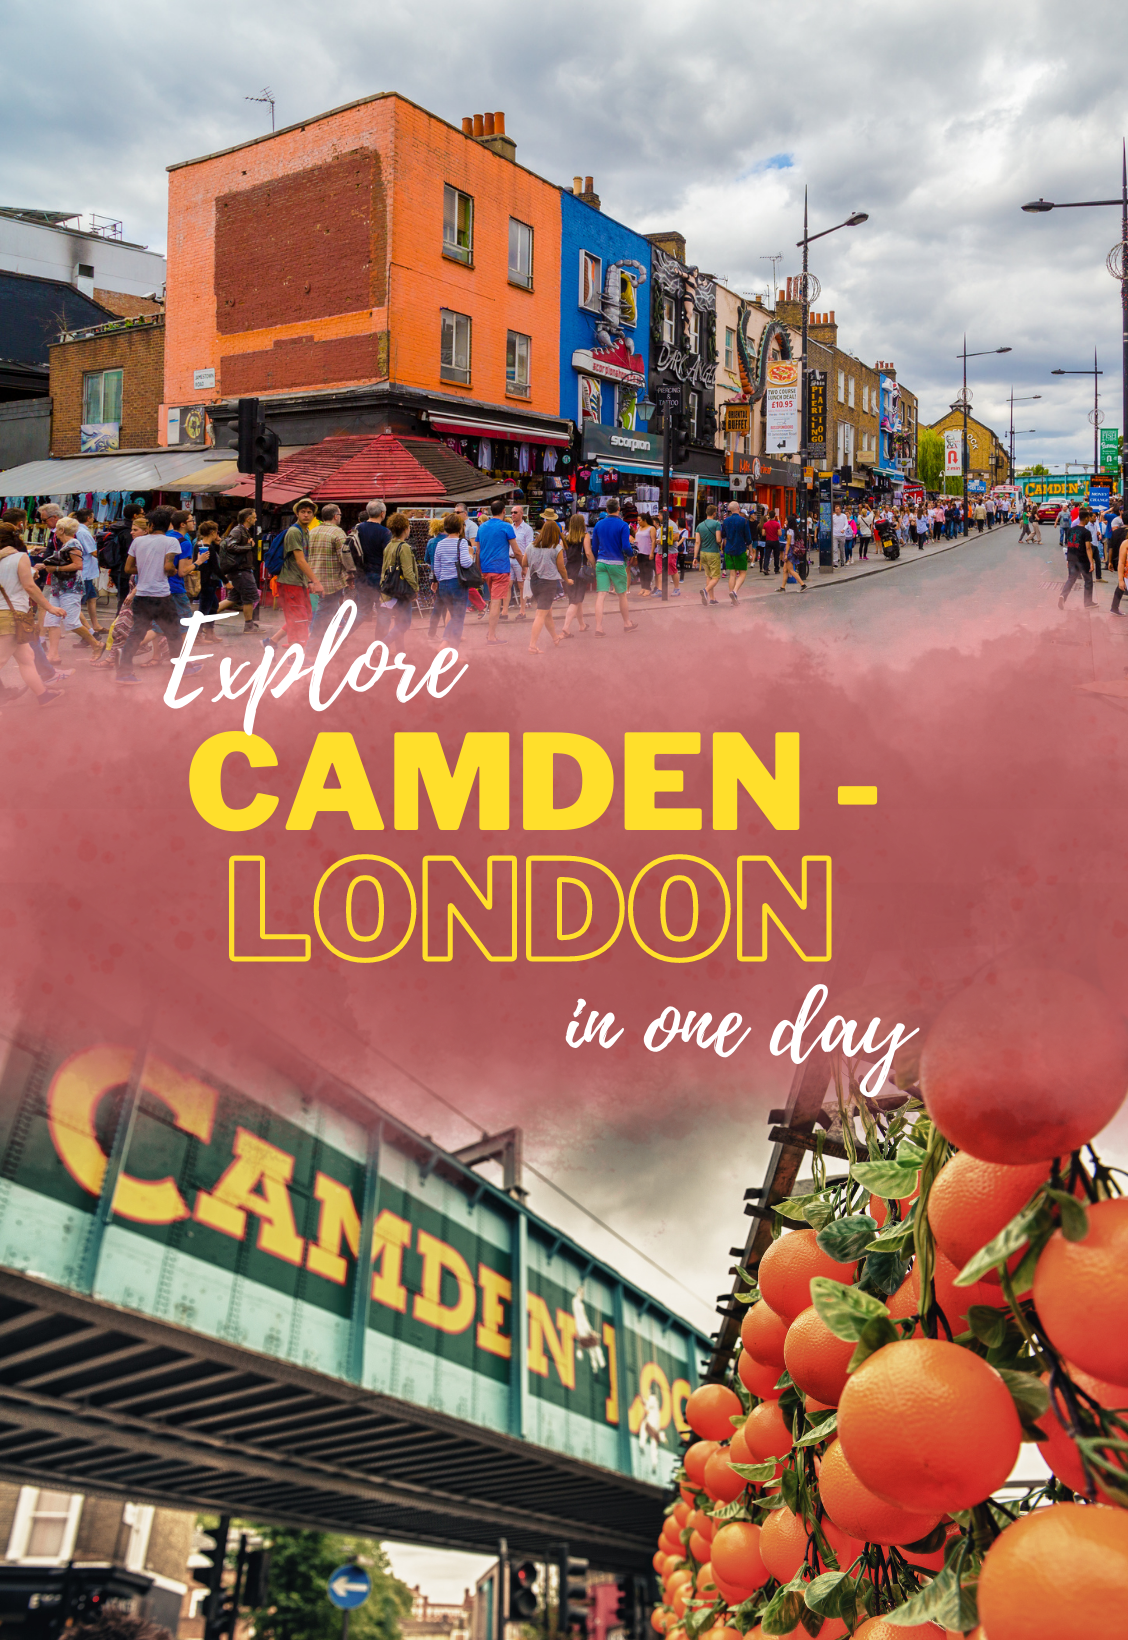 Explore Camden - London in one day